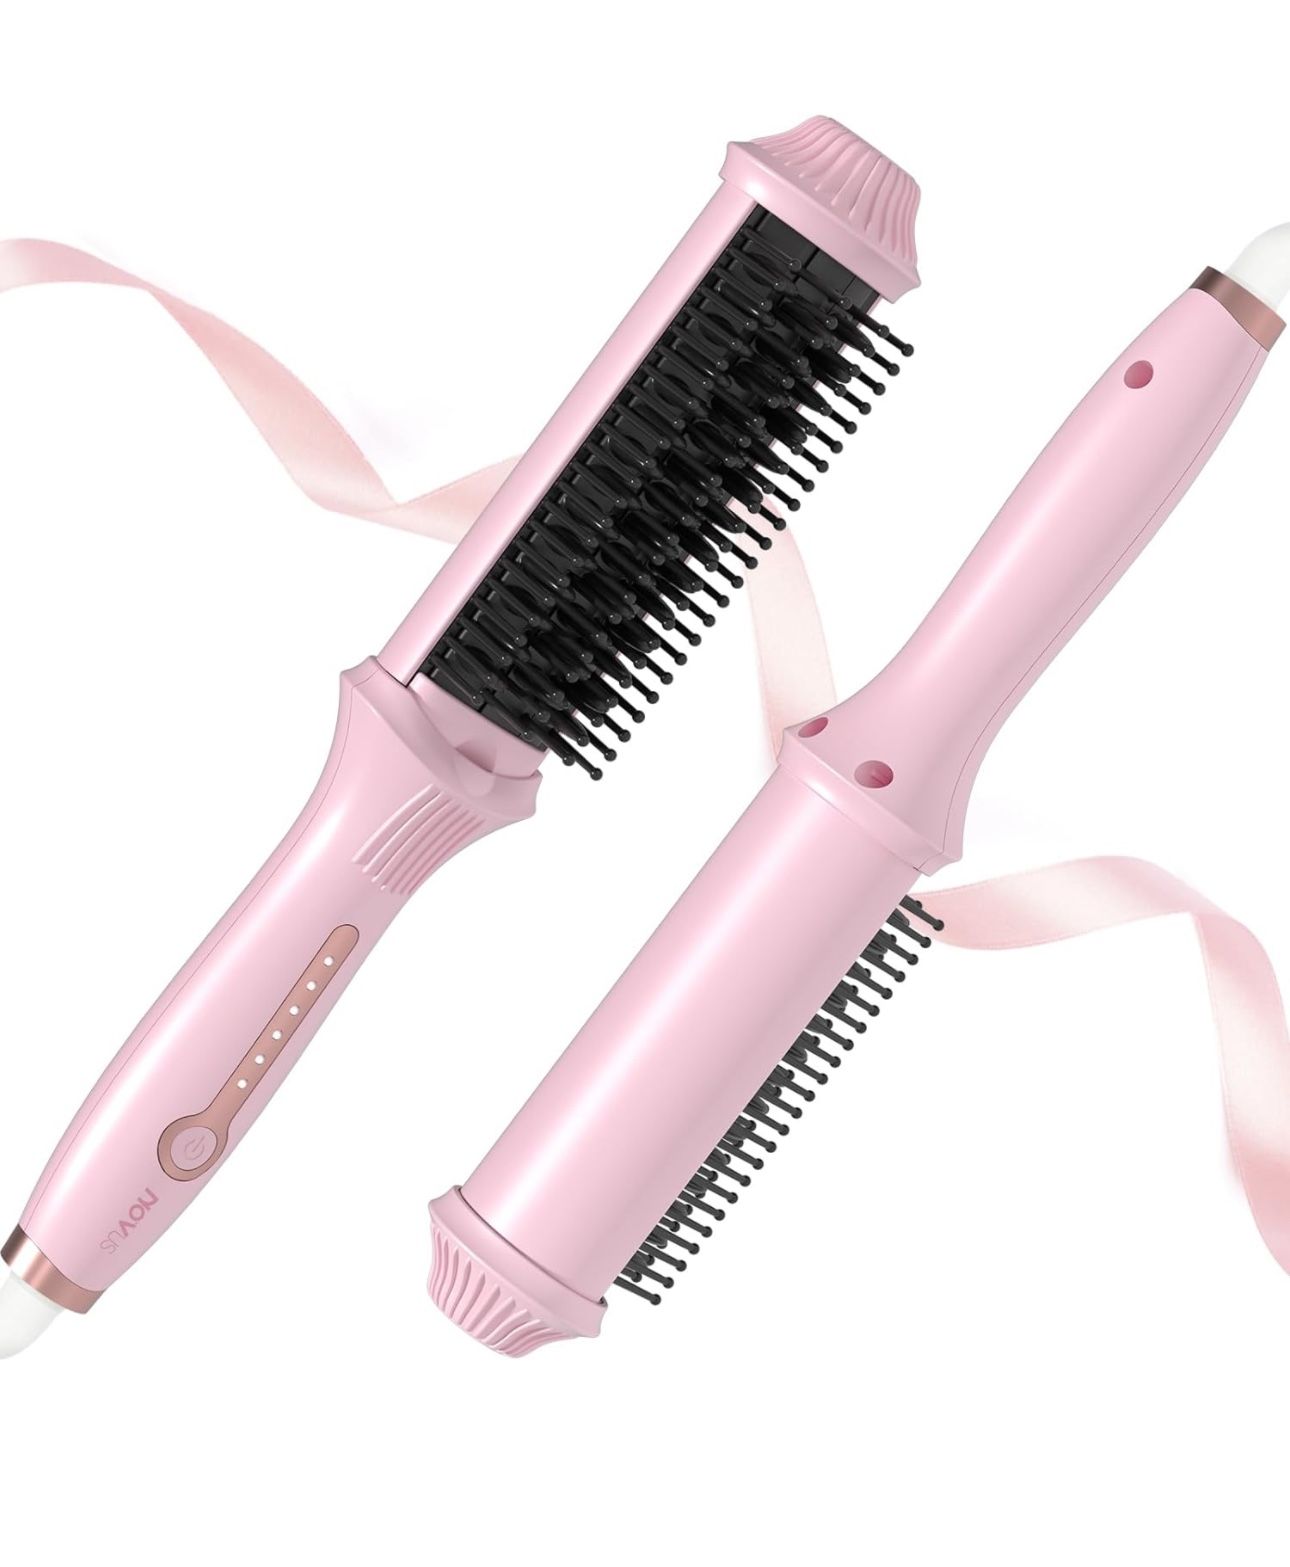 NEW IN BOX - Hair Straightener Brush, Negative Ion Hair Straightener Comb, 30s Fast Heating & 4 Temp Settings, Hot Comb for All Hair Types, Less